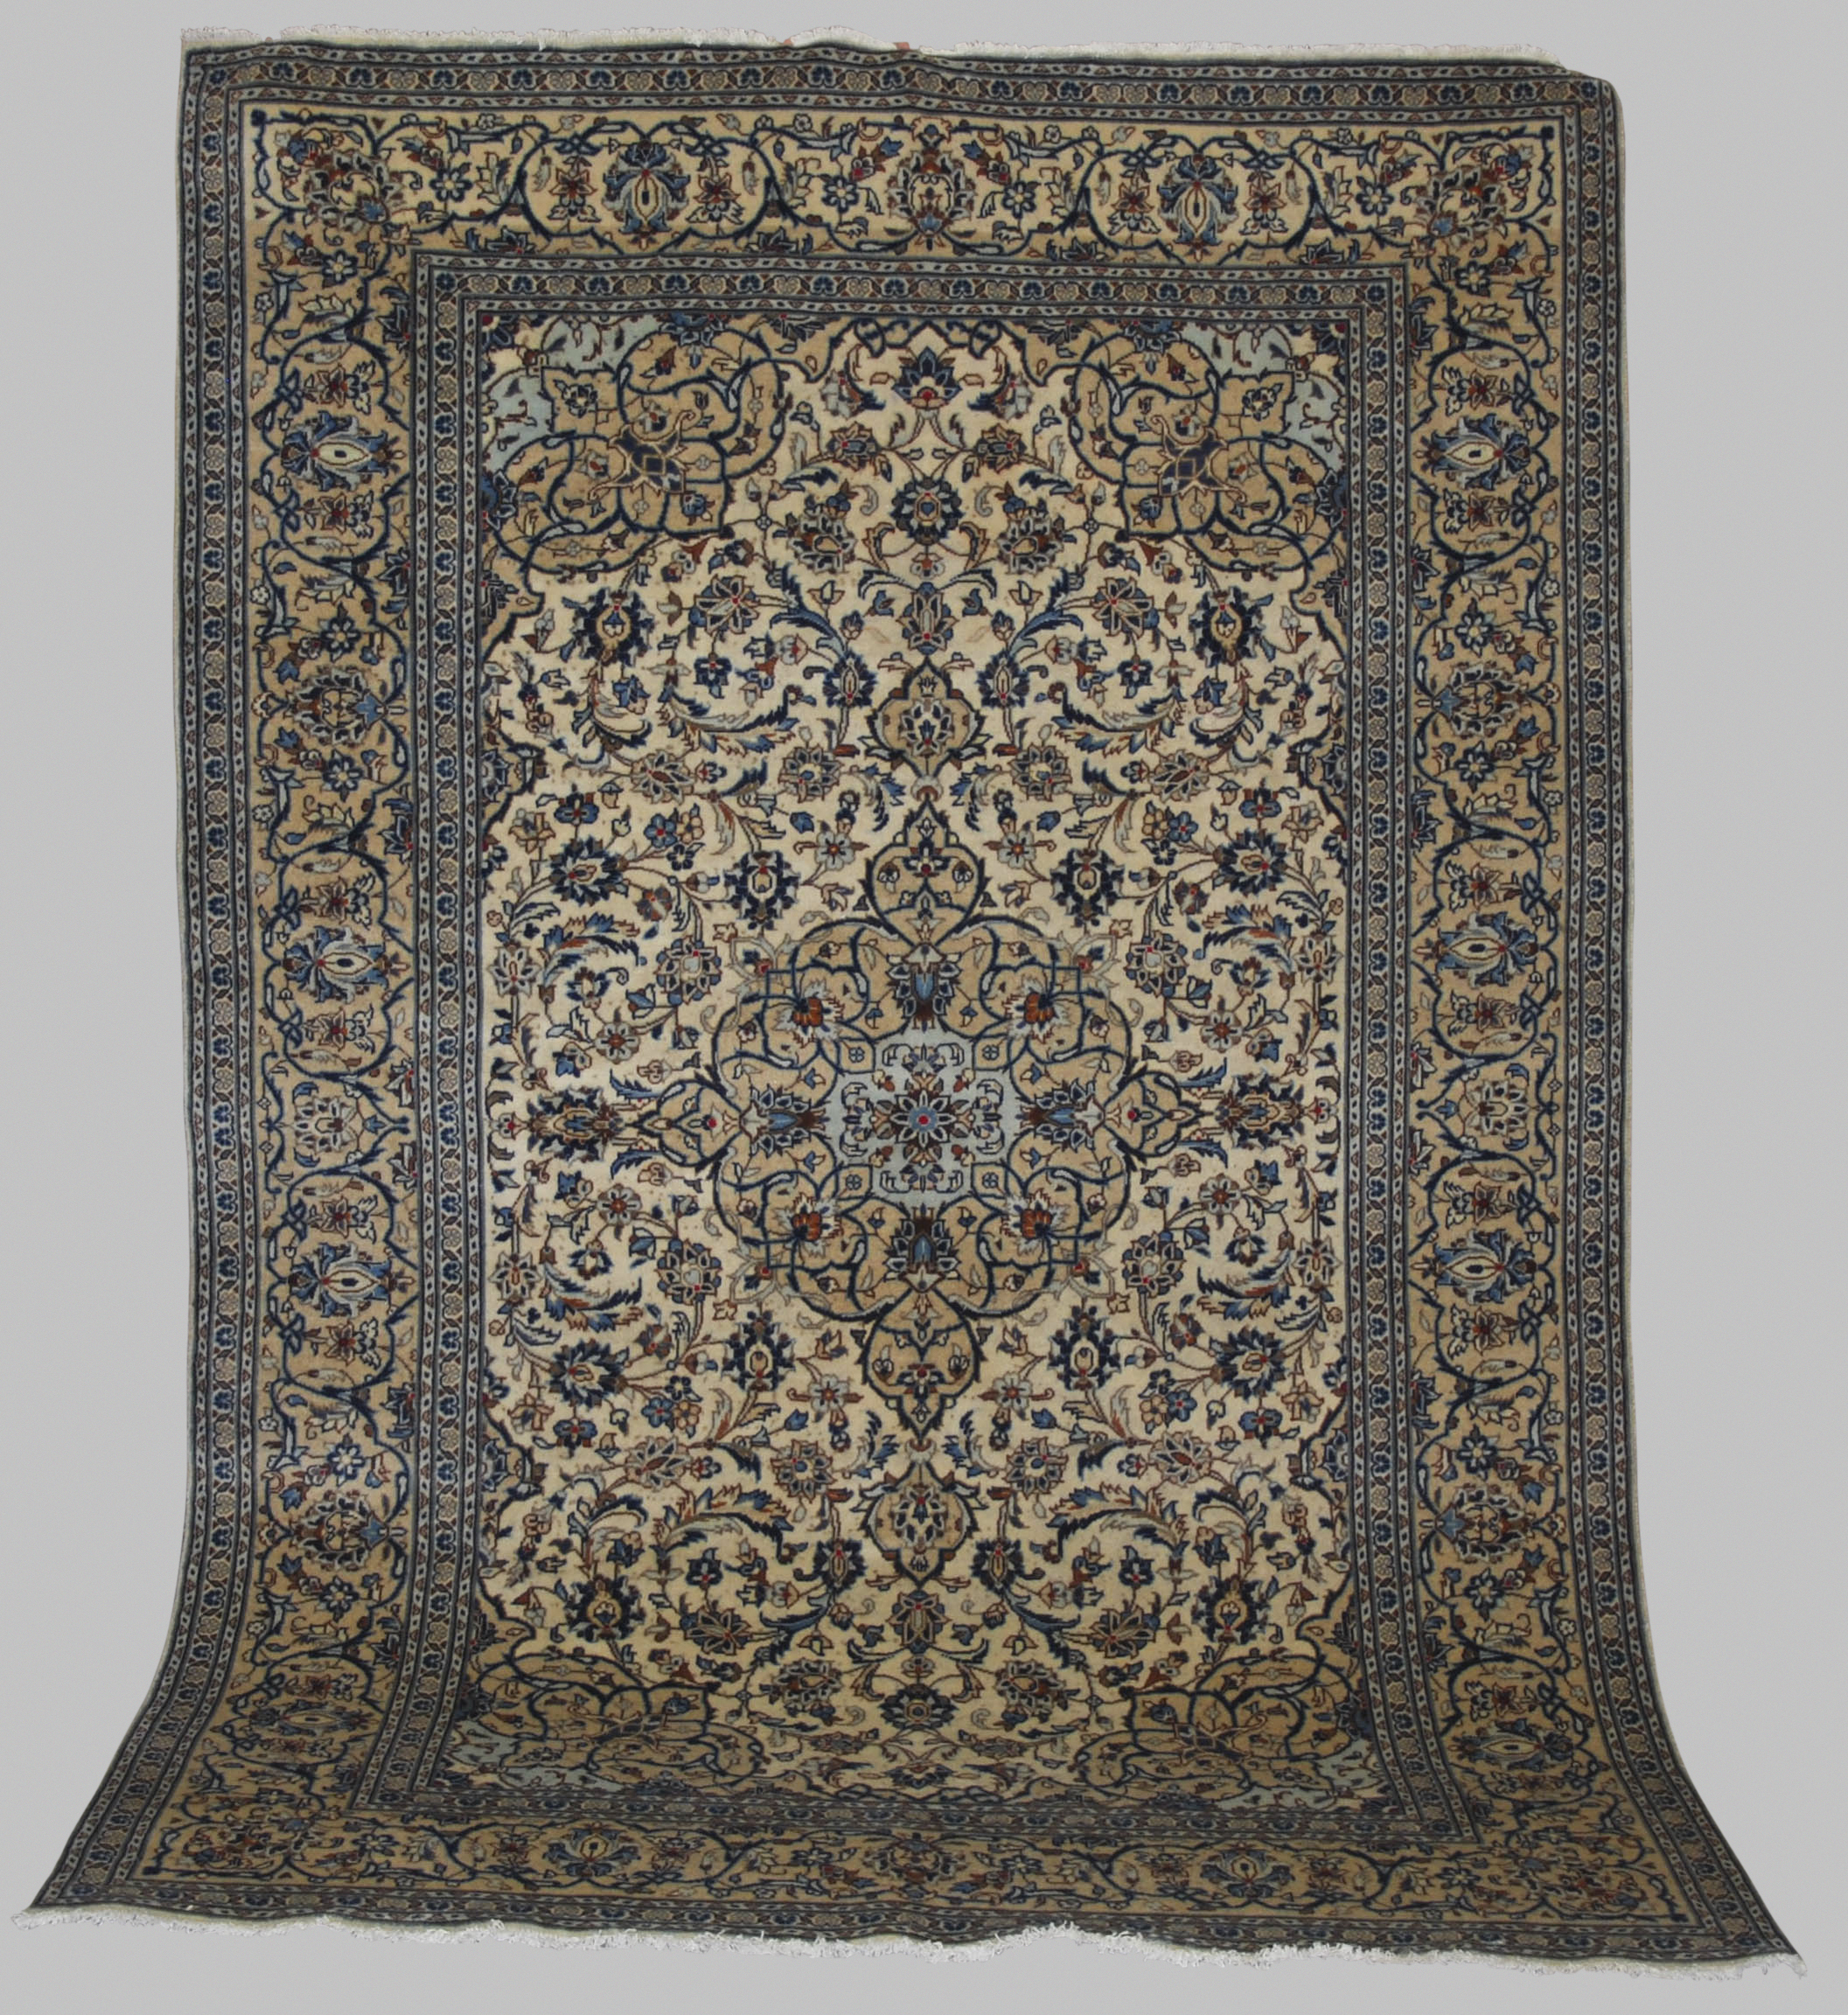 A Persian rug, Kashan, 20th century, the ivory ground decorated with all-over design of scrolling